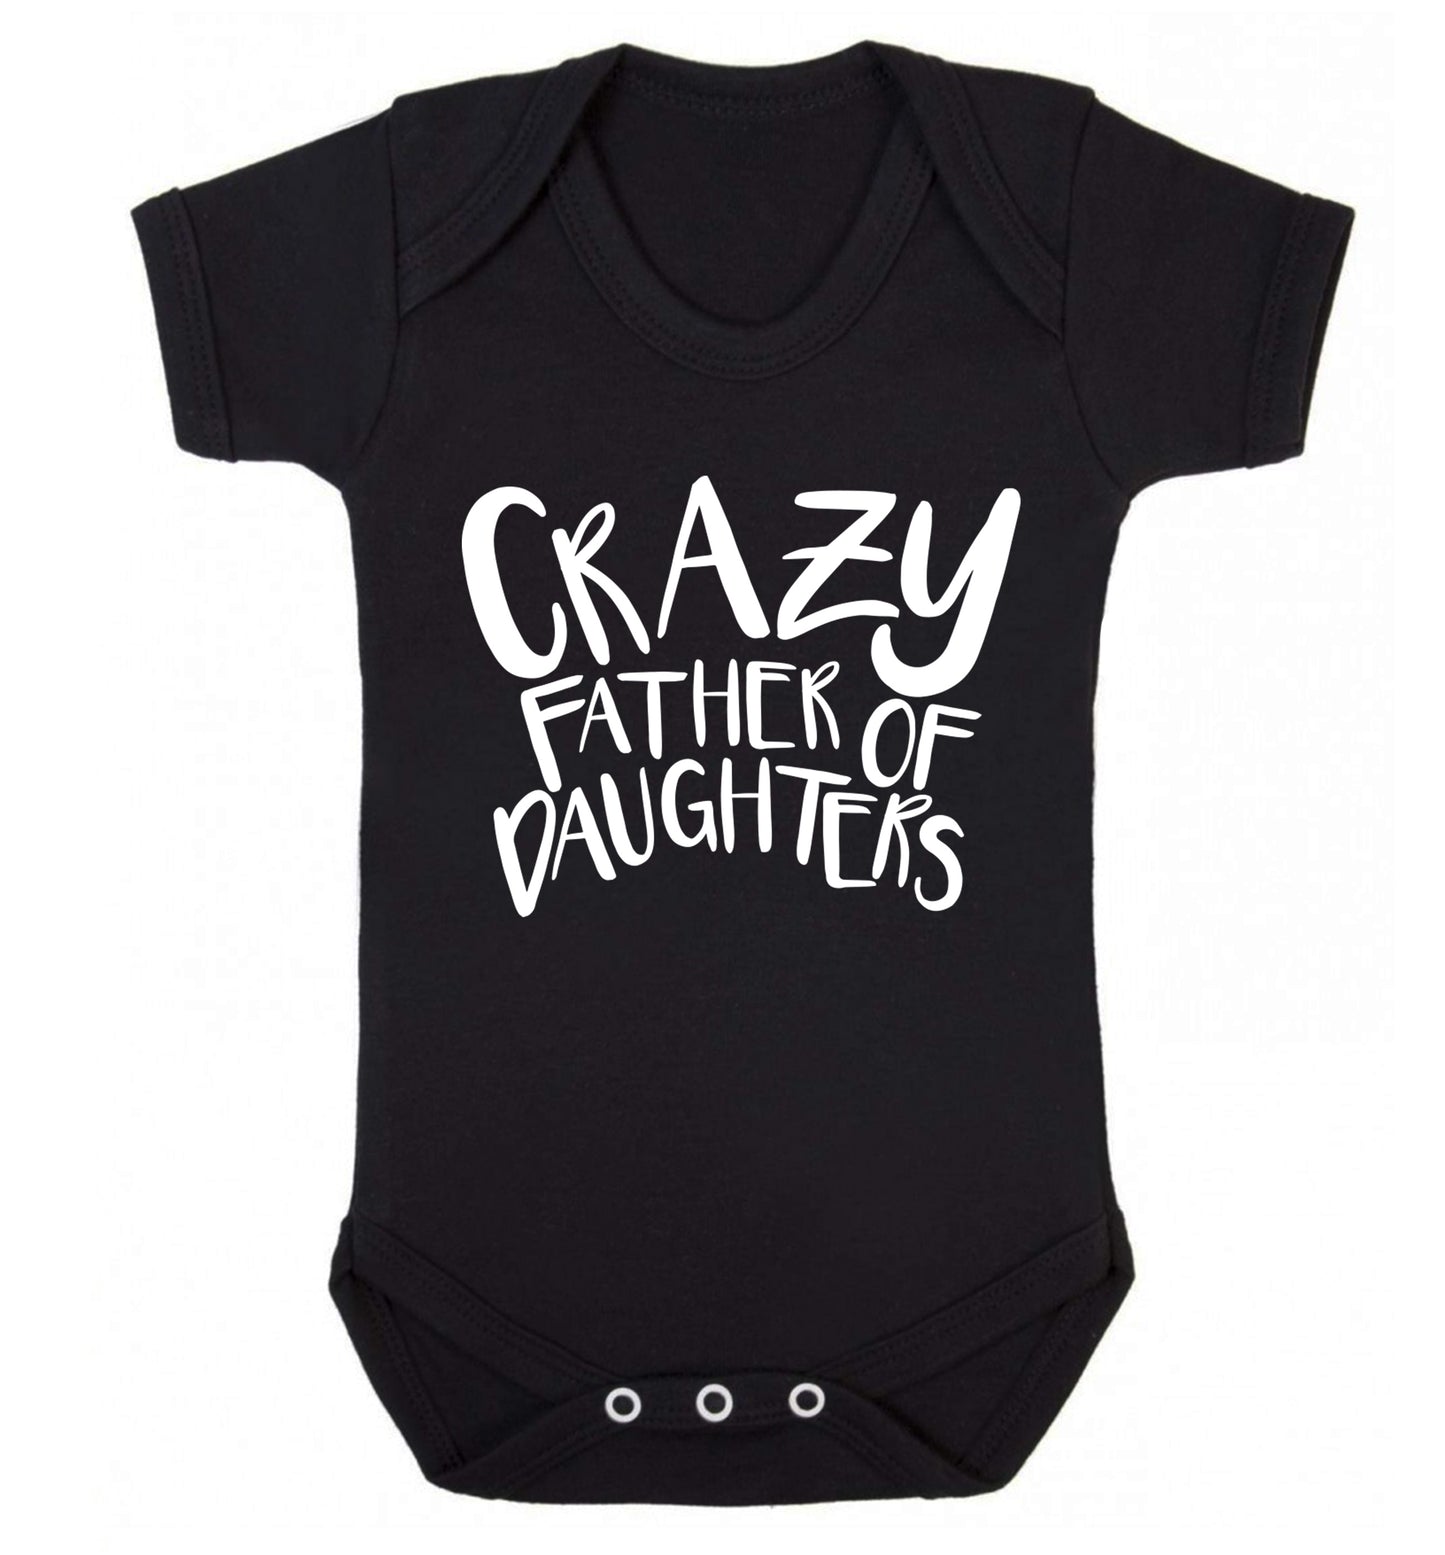 Crazy father of daughters Baby Vest black 18-24 months